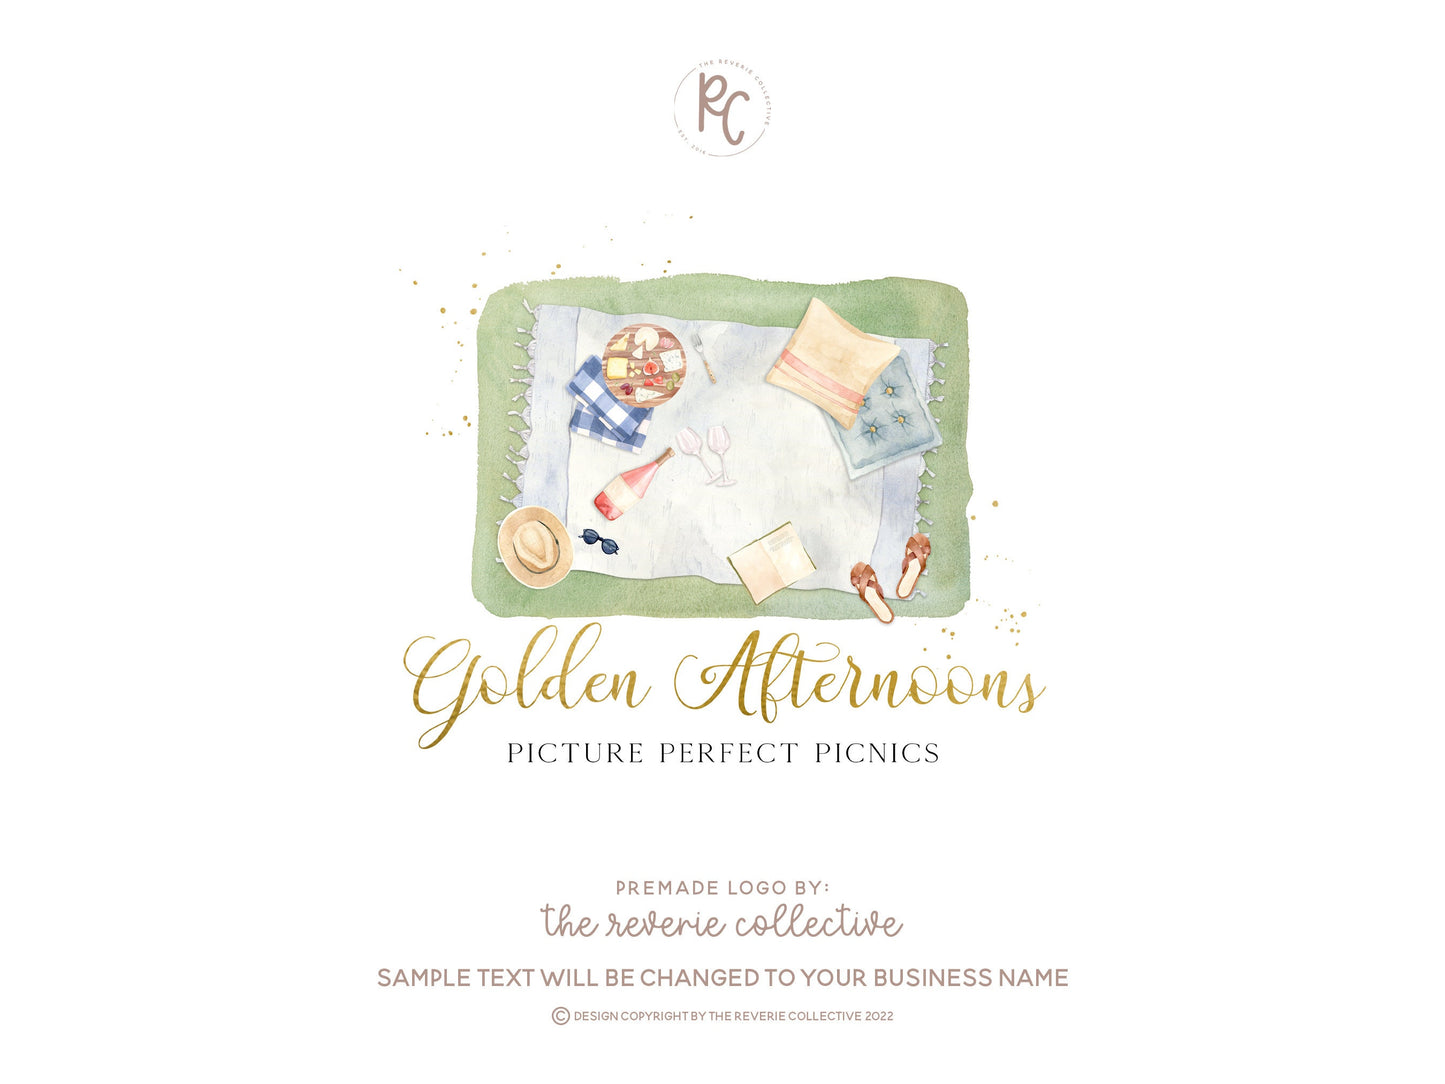 Golden Afternoons | Premade Logo Design | Picnic, Charcuterie, Cheese Board, Outdoors